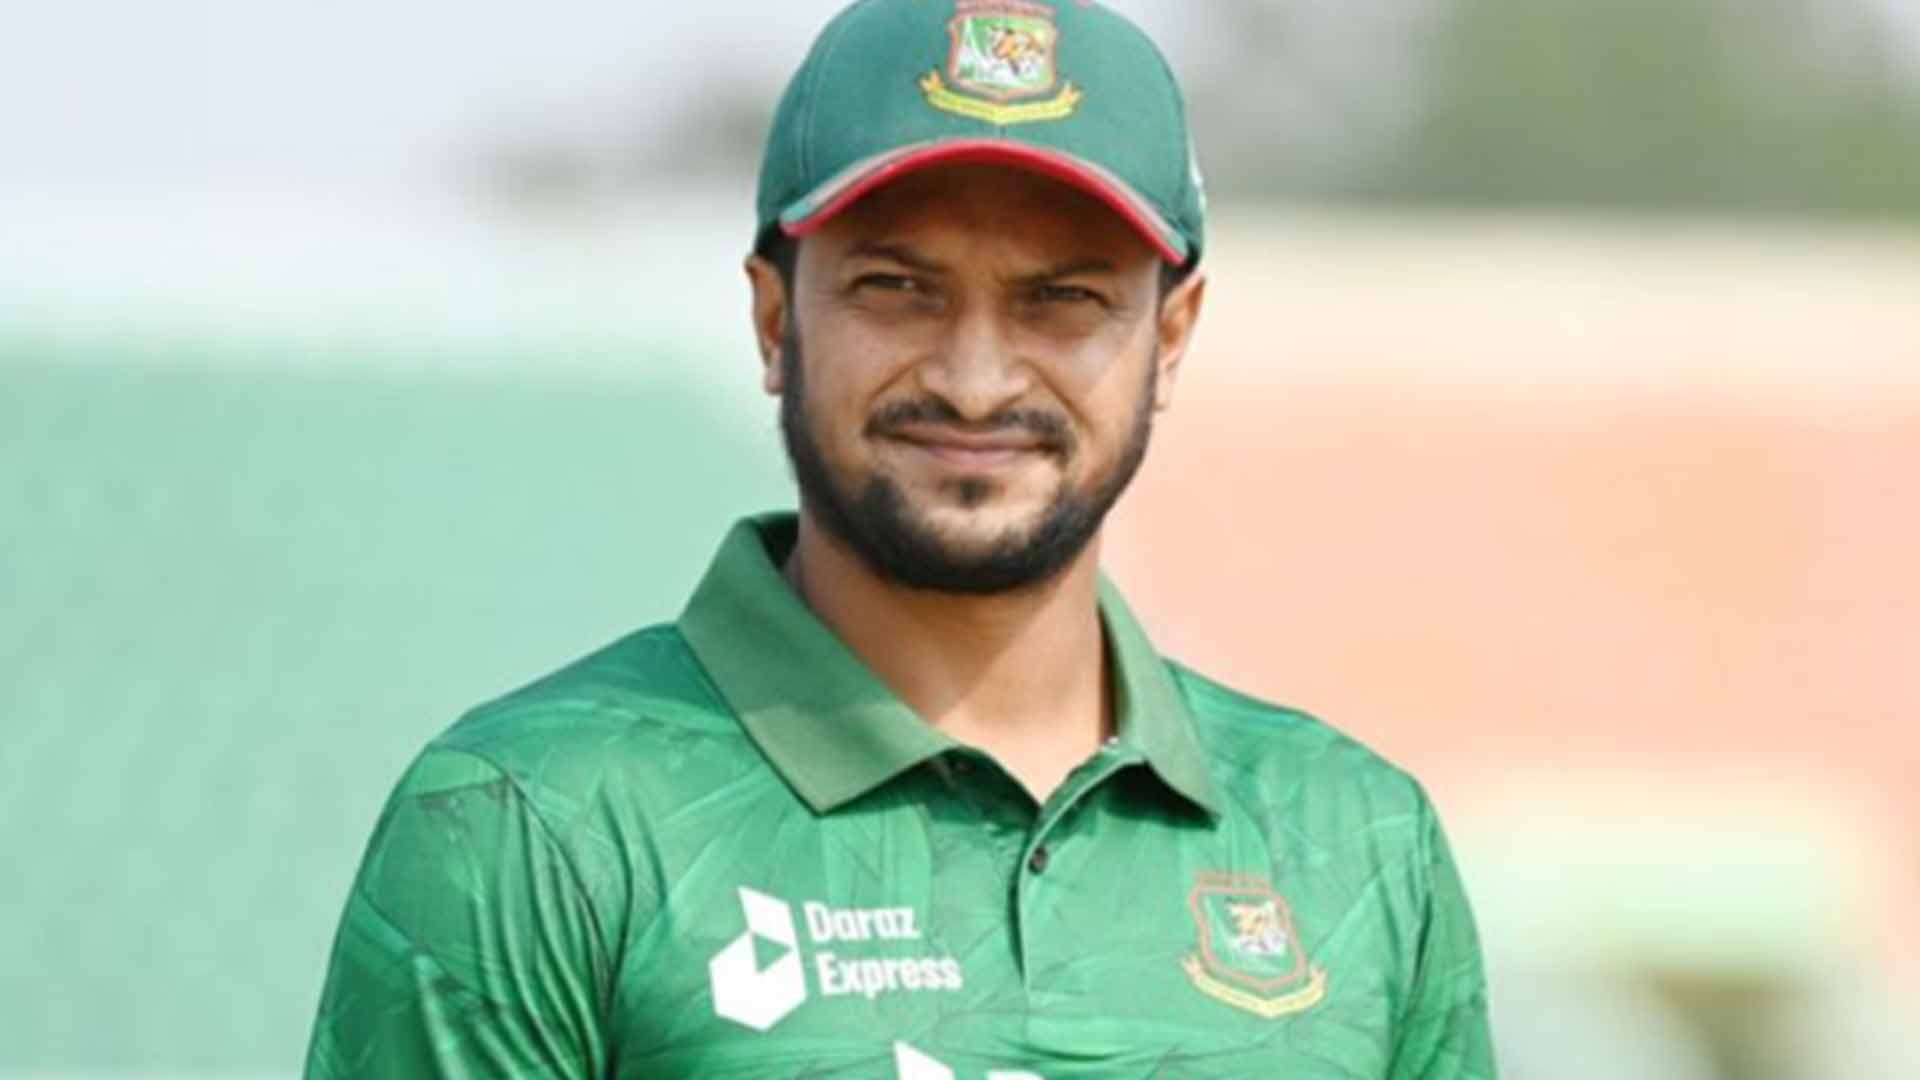 Post-World Cup, Shakib will step down as captain